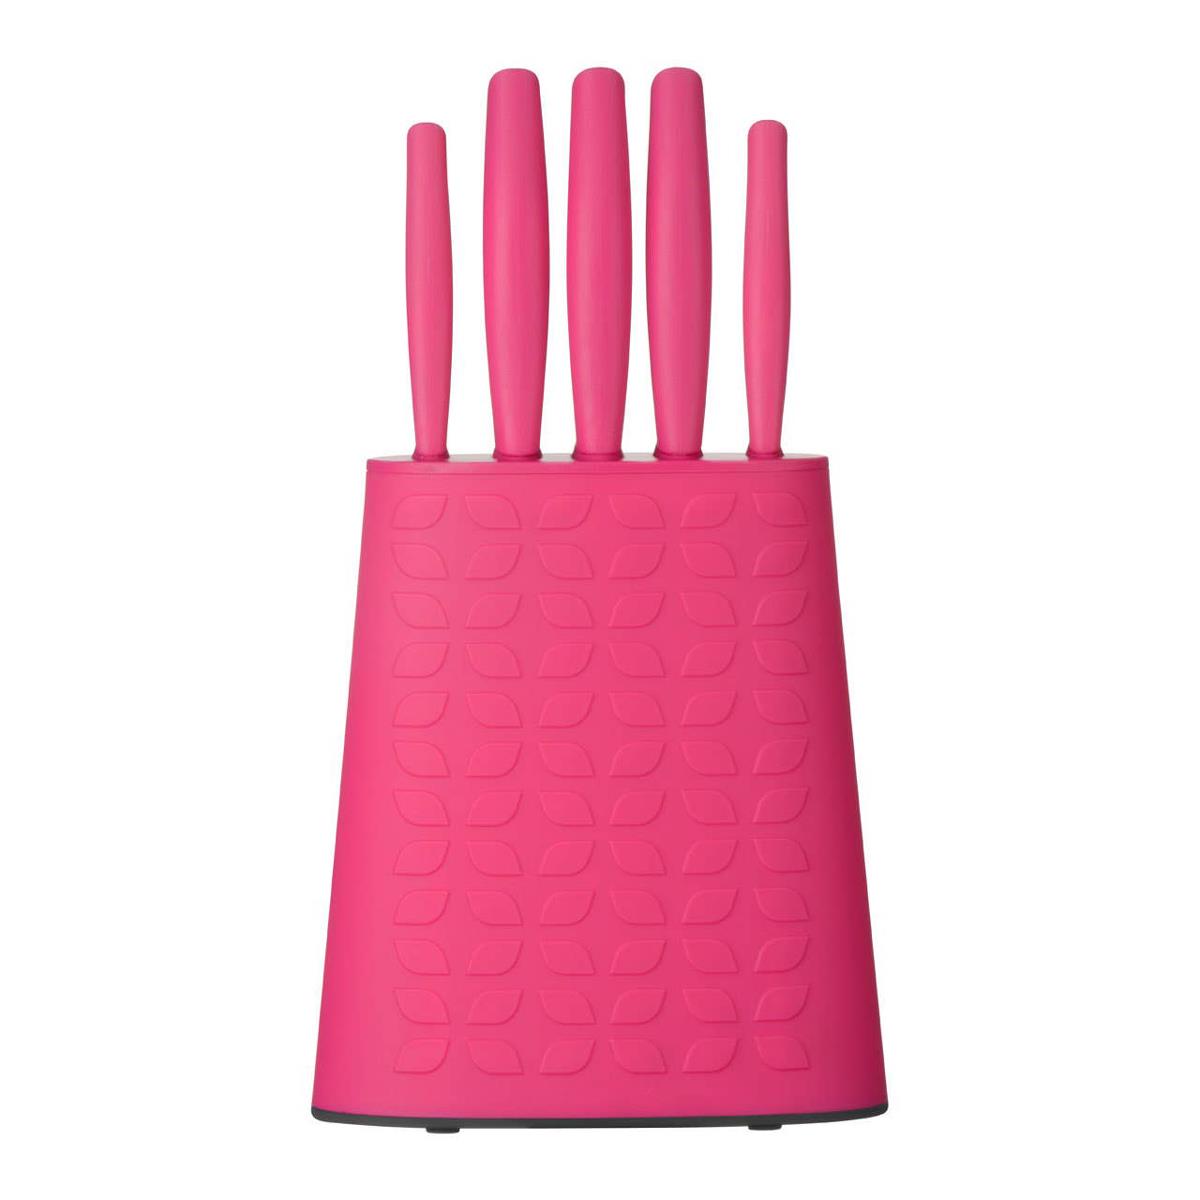 https://www.idealtextiles.shop/wp-content/uploads/1699/12/choose-from-a-wide-variety-of-great-quality-at-low-prices-from-brights-pink-5-piece-knife-block-set-aubina-x_1.jpg